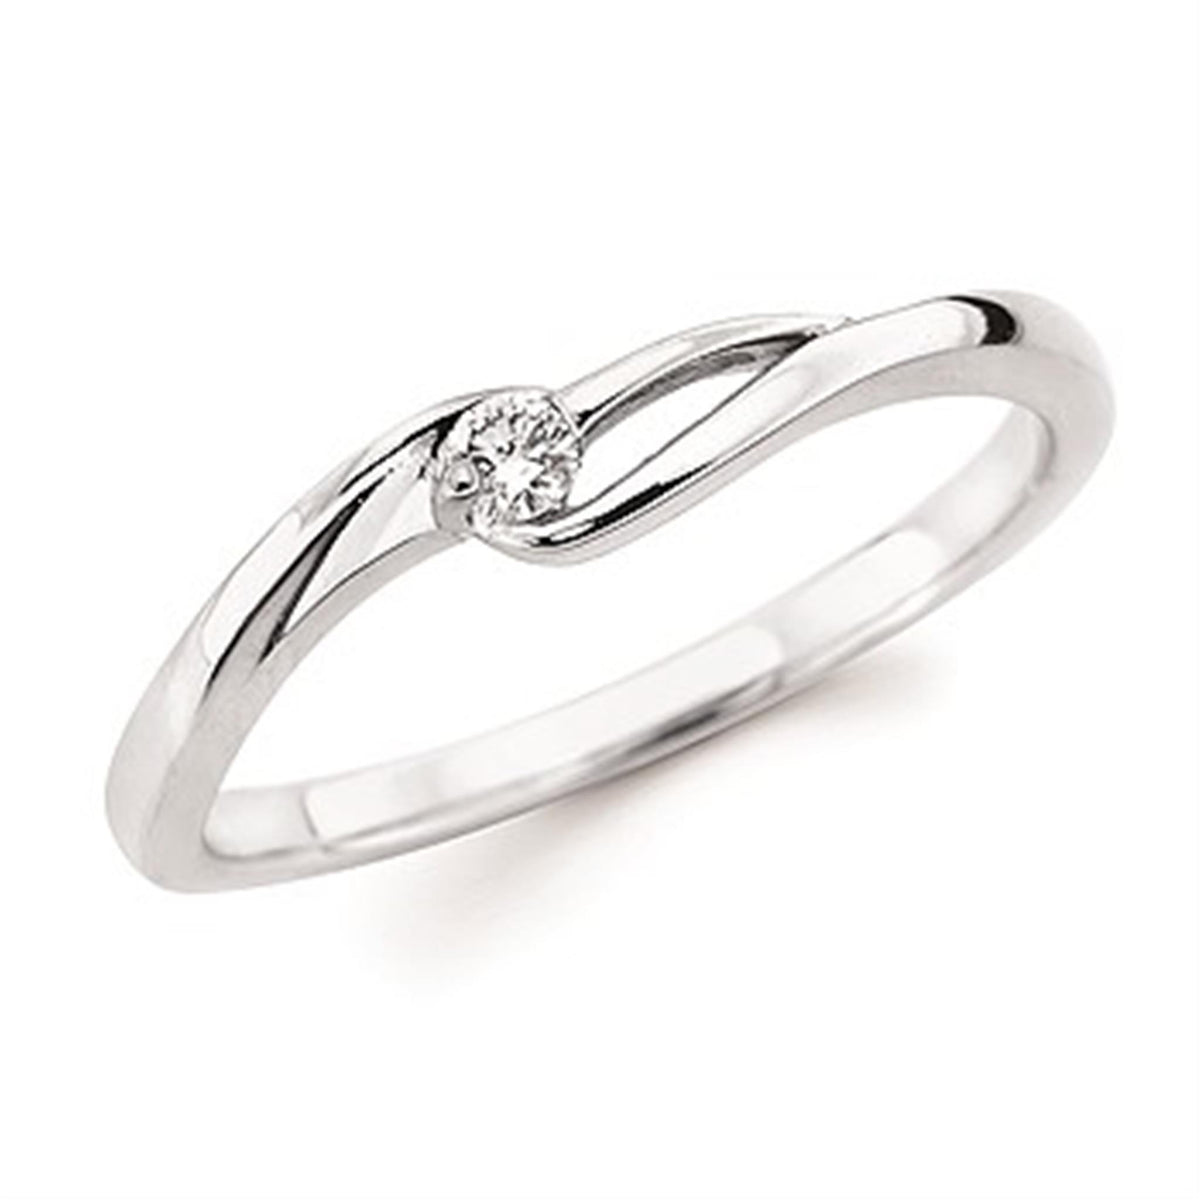 Sterling Silver Prong Set Fashion Ring